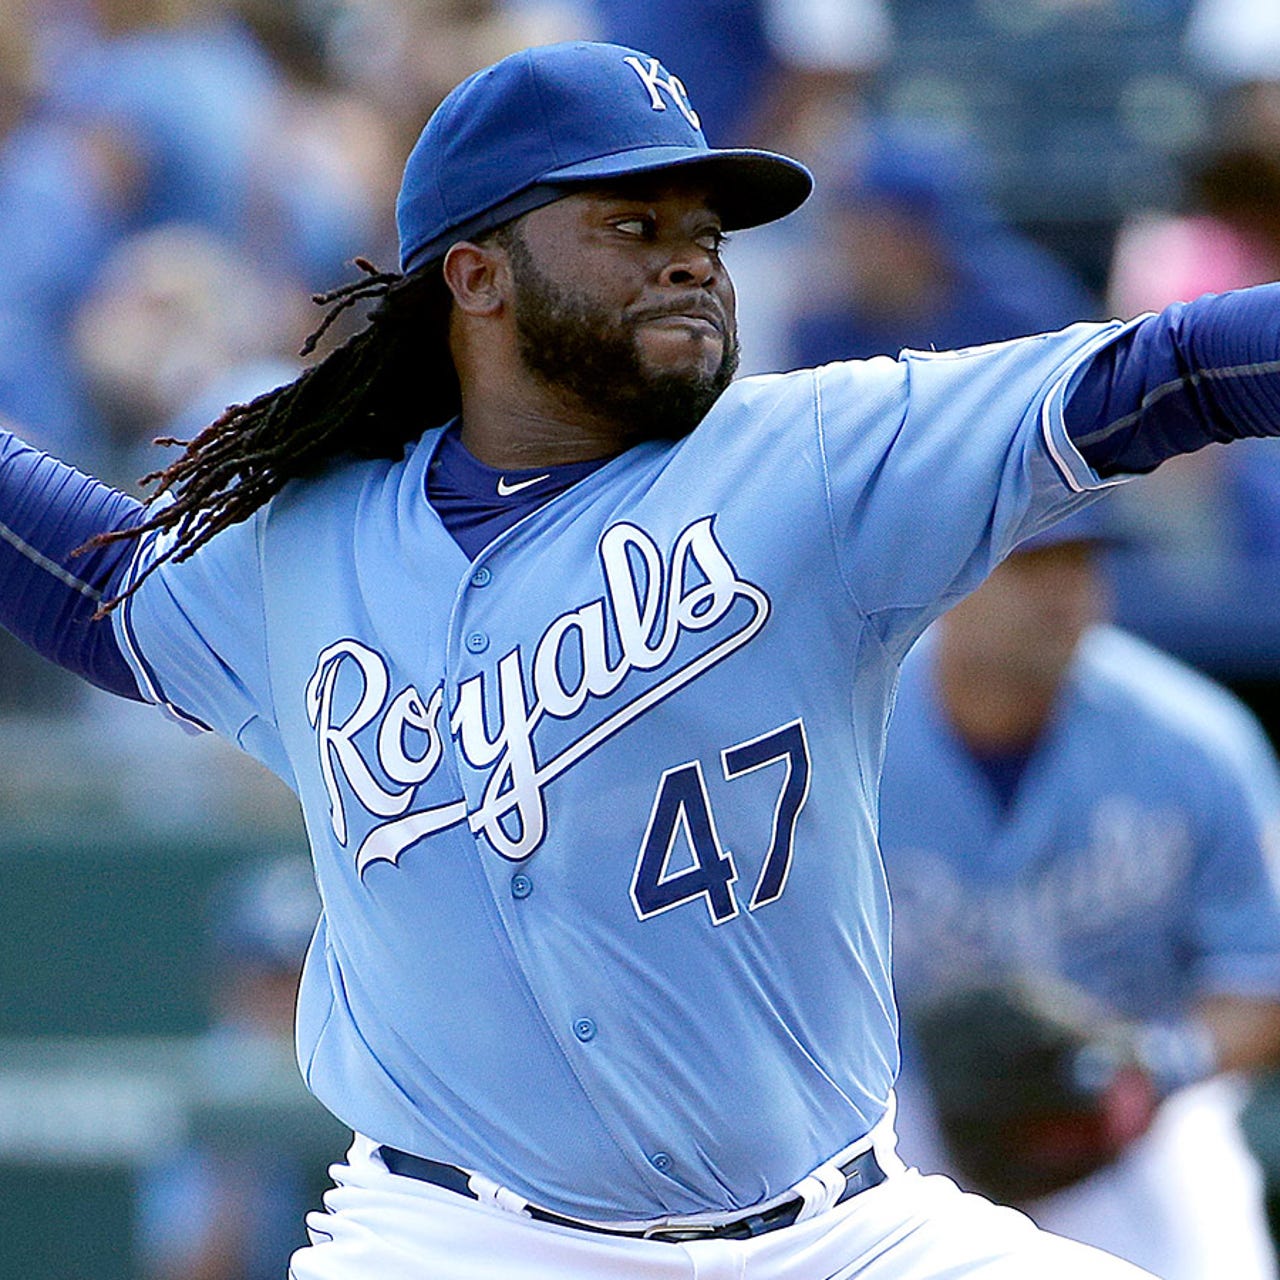 Johnny Cueto strikes out four Royals in White Sox loss